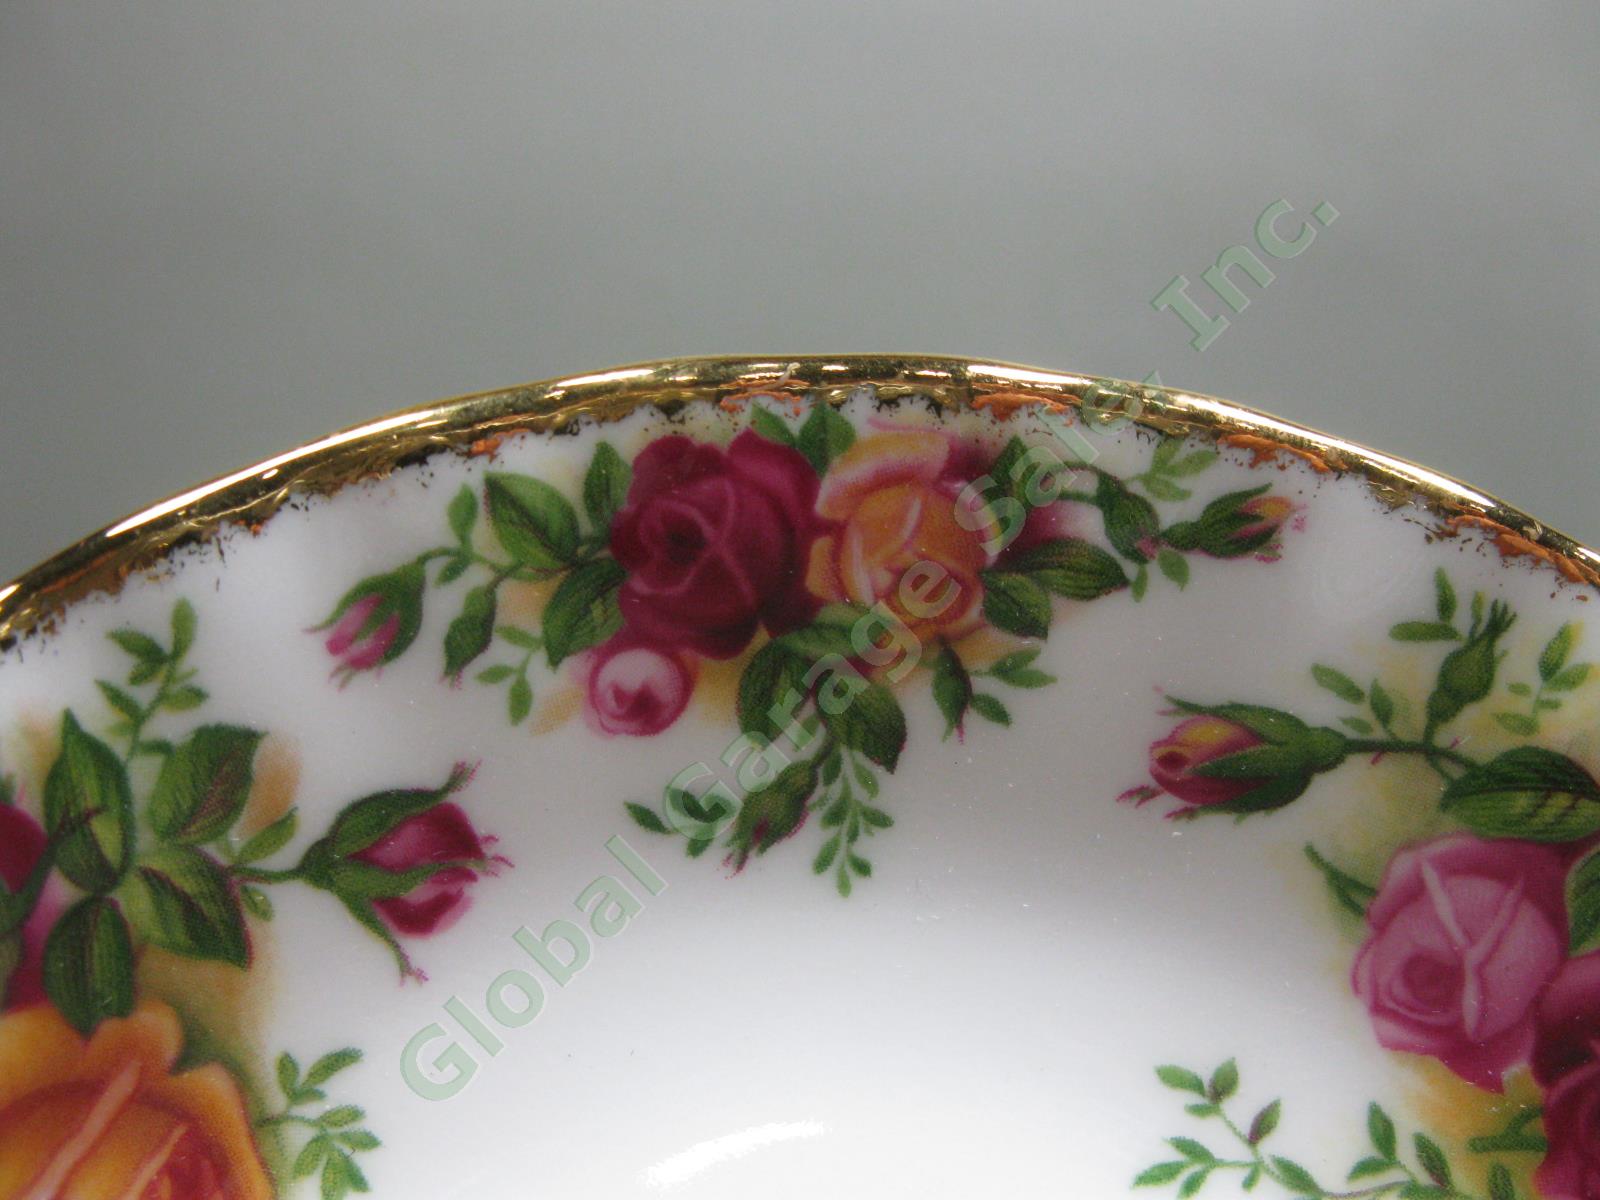 8 Royal Albert Old Country Roses Footed Tea Cup/Saucer Gold Trim Bone China Set 9